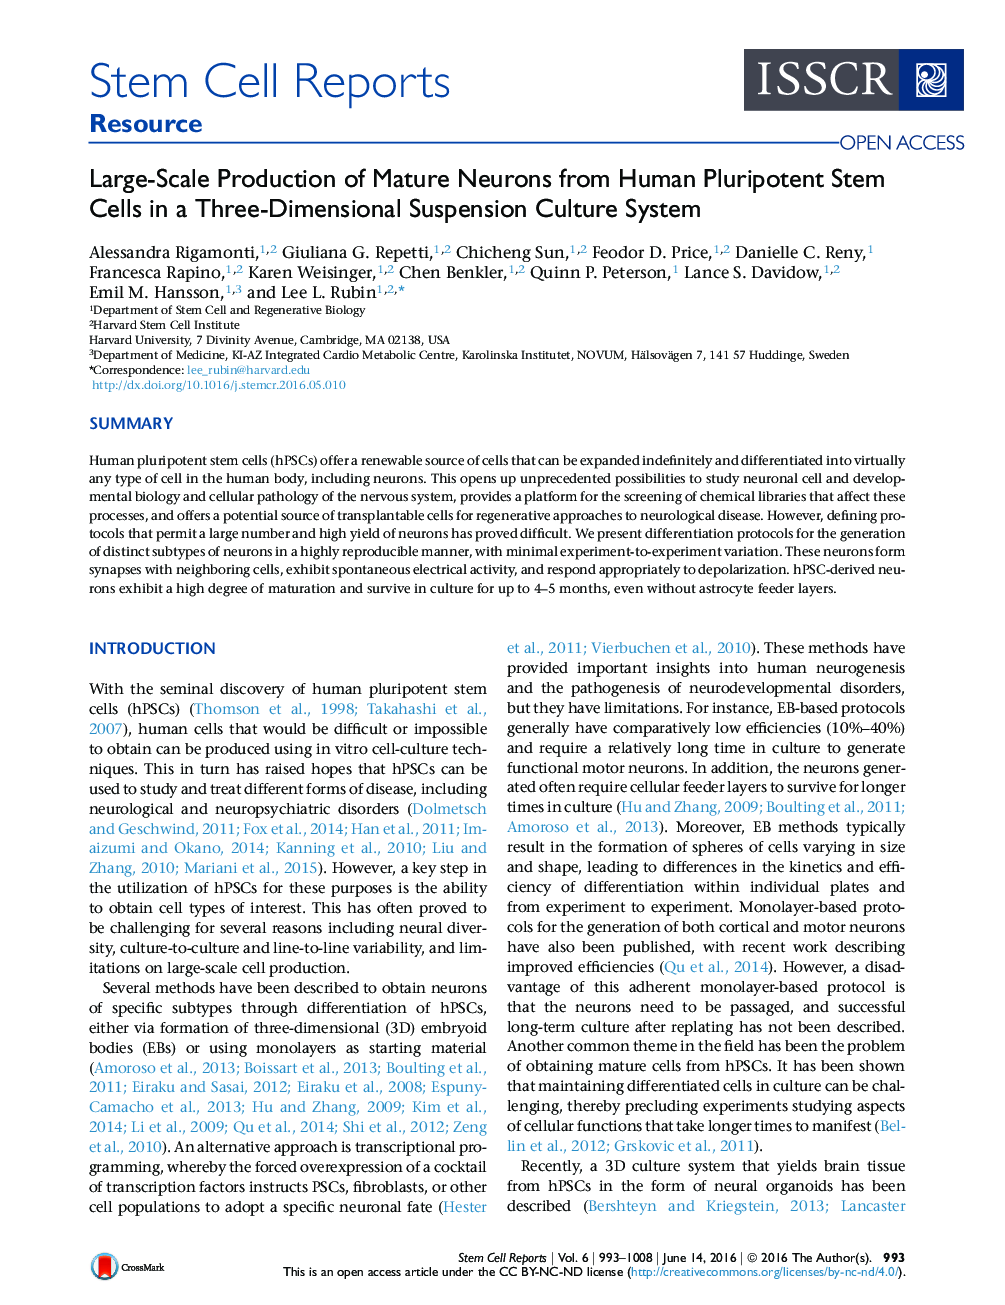 Large-Scale Production of Mature Neurons from Human Pluripotent Stem Cells in a Three-Dimensional Suspension Culture System